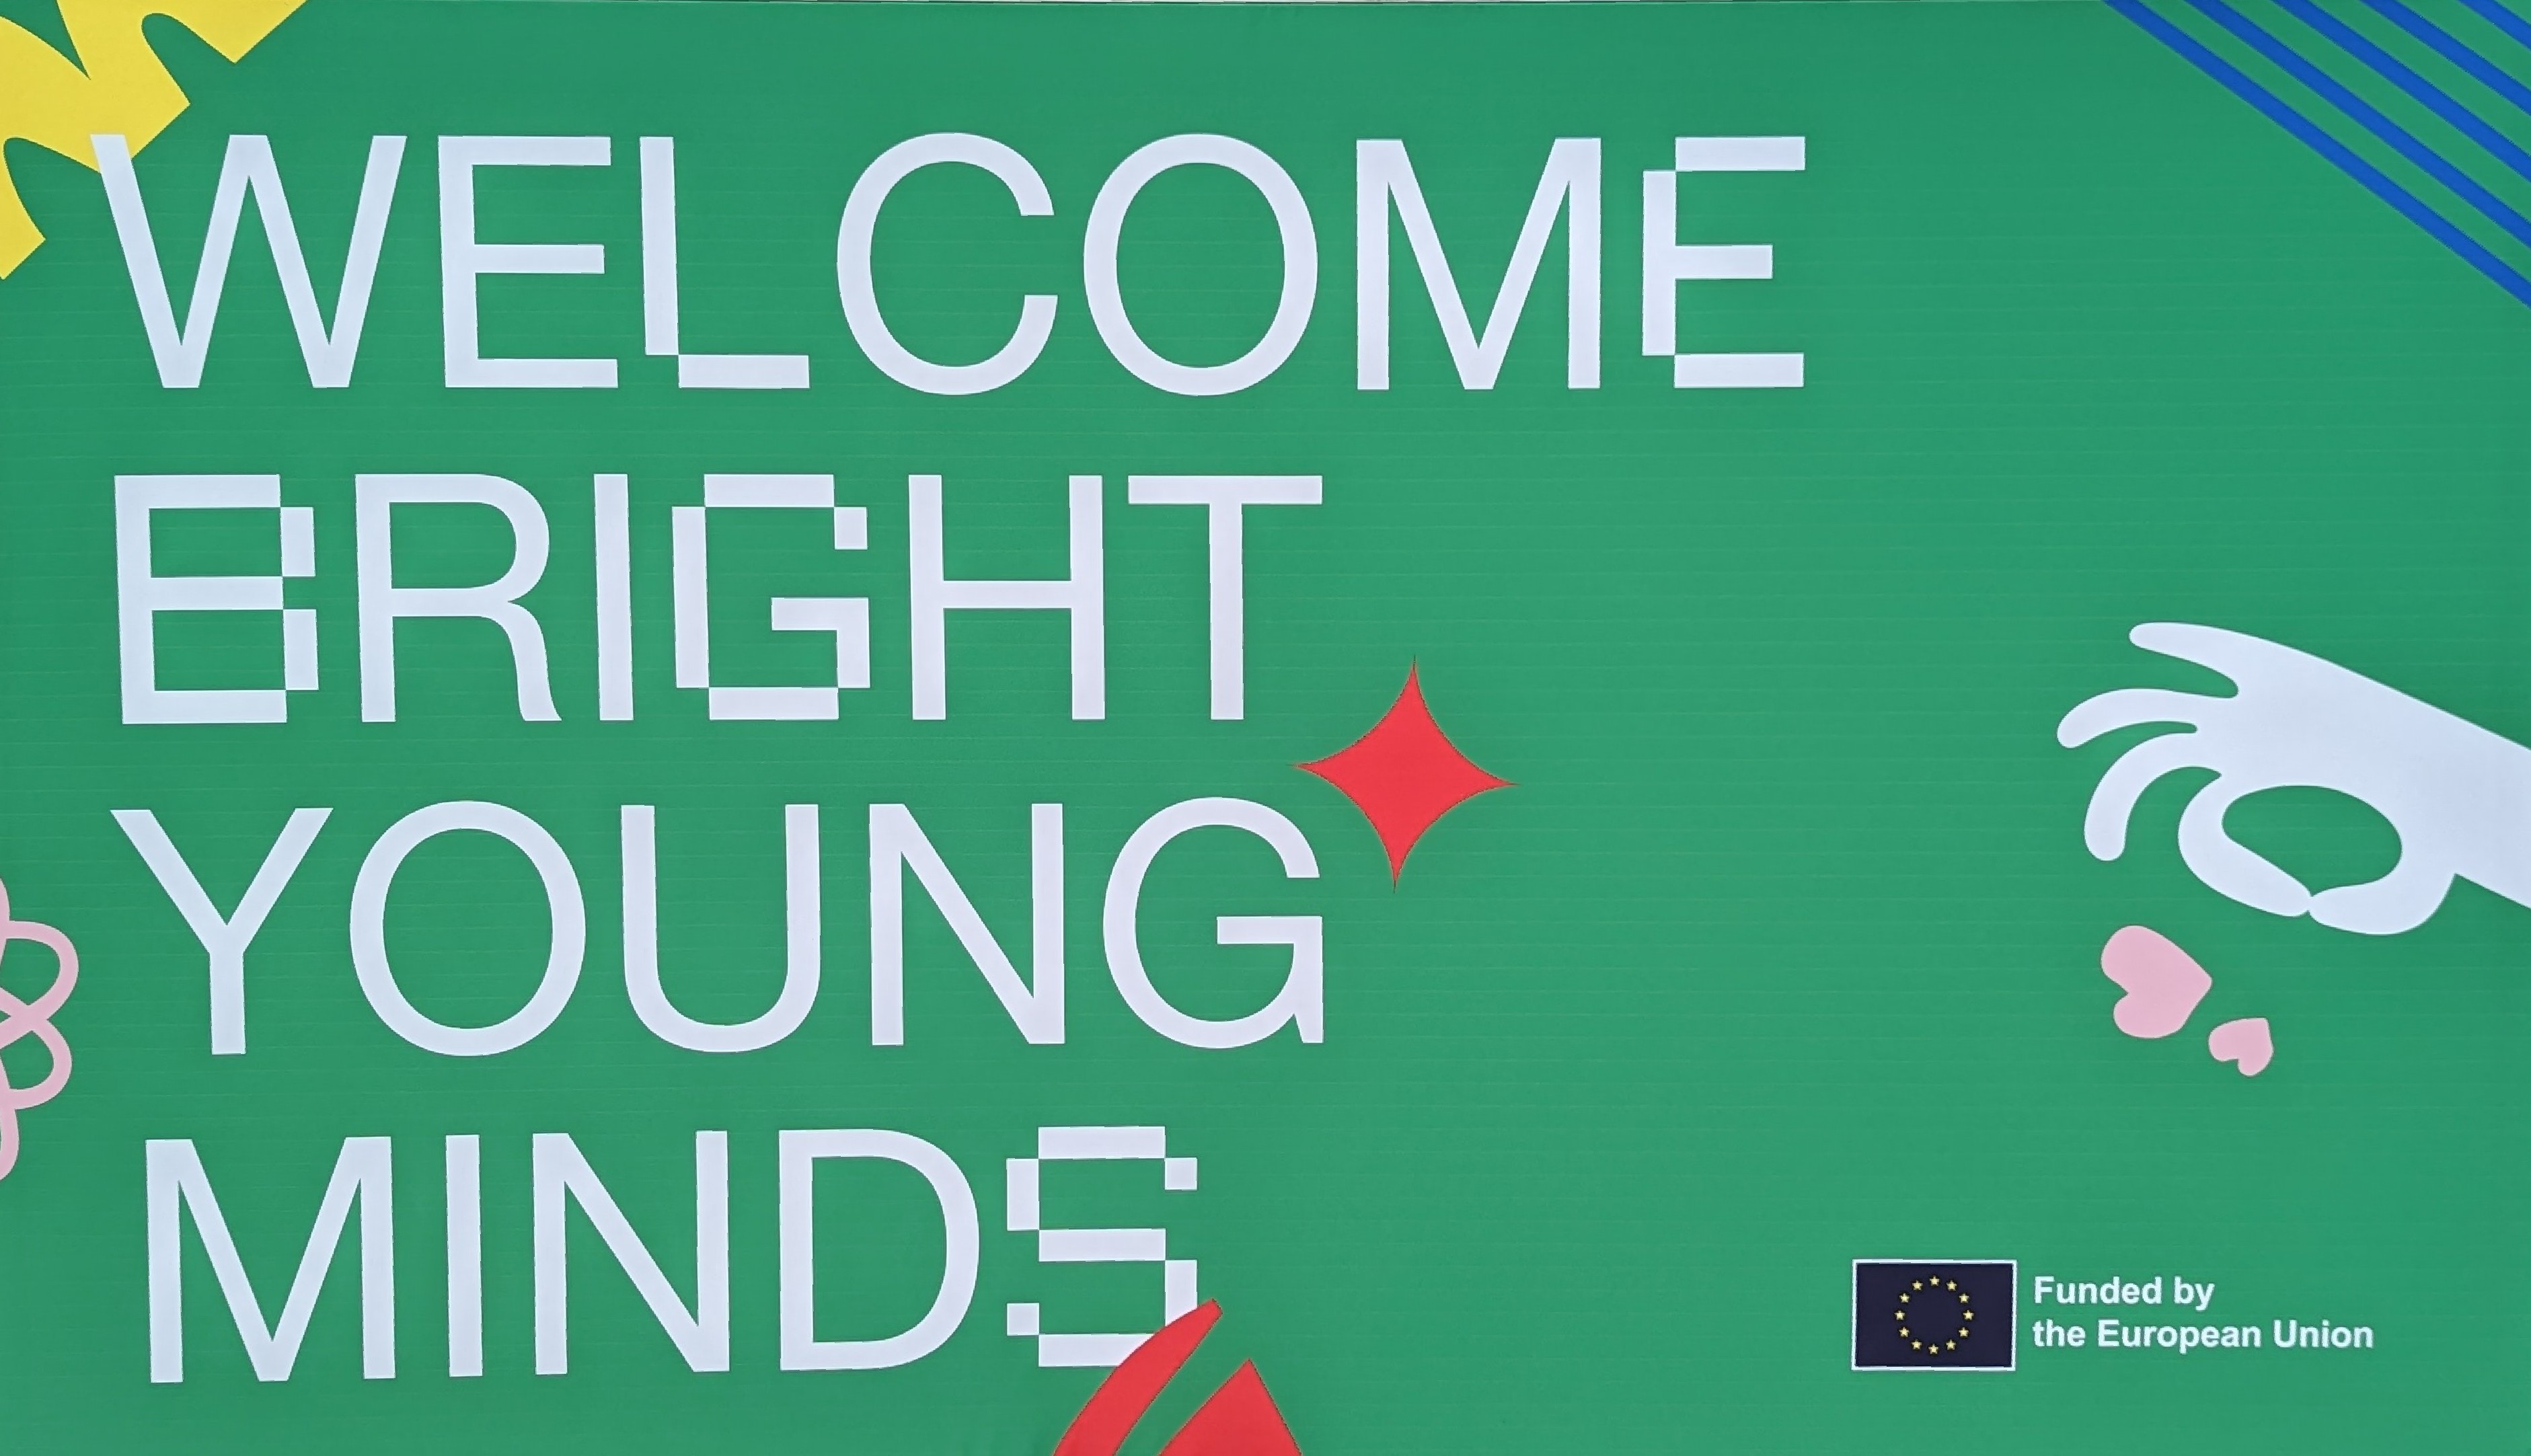 "Welcome Bright Young Minds" is printed on a green background